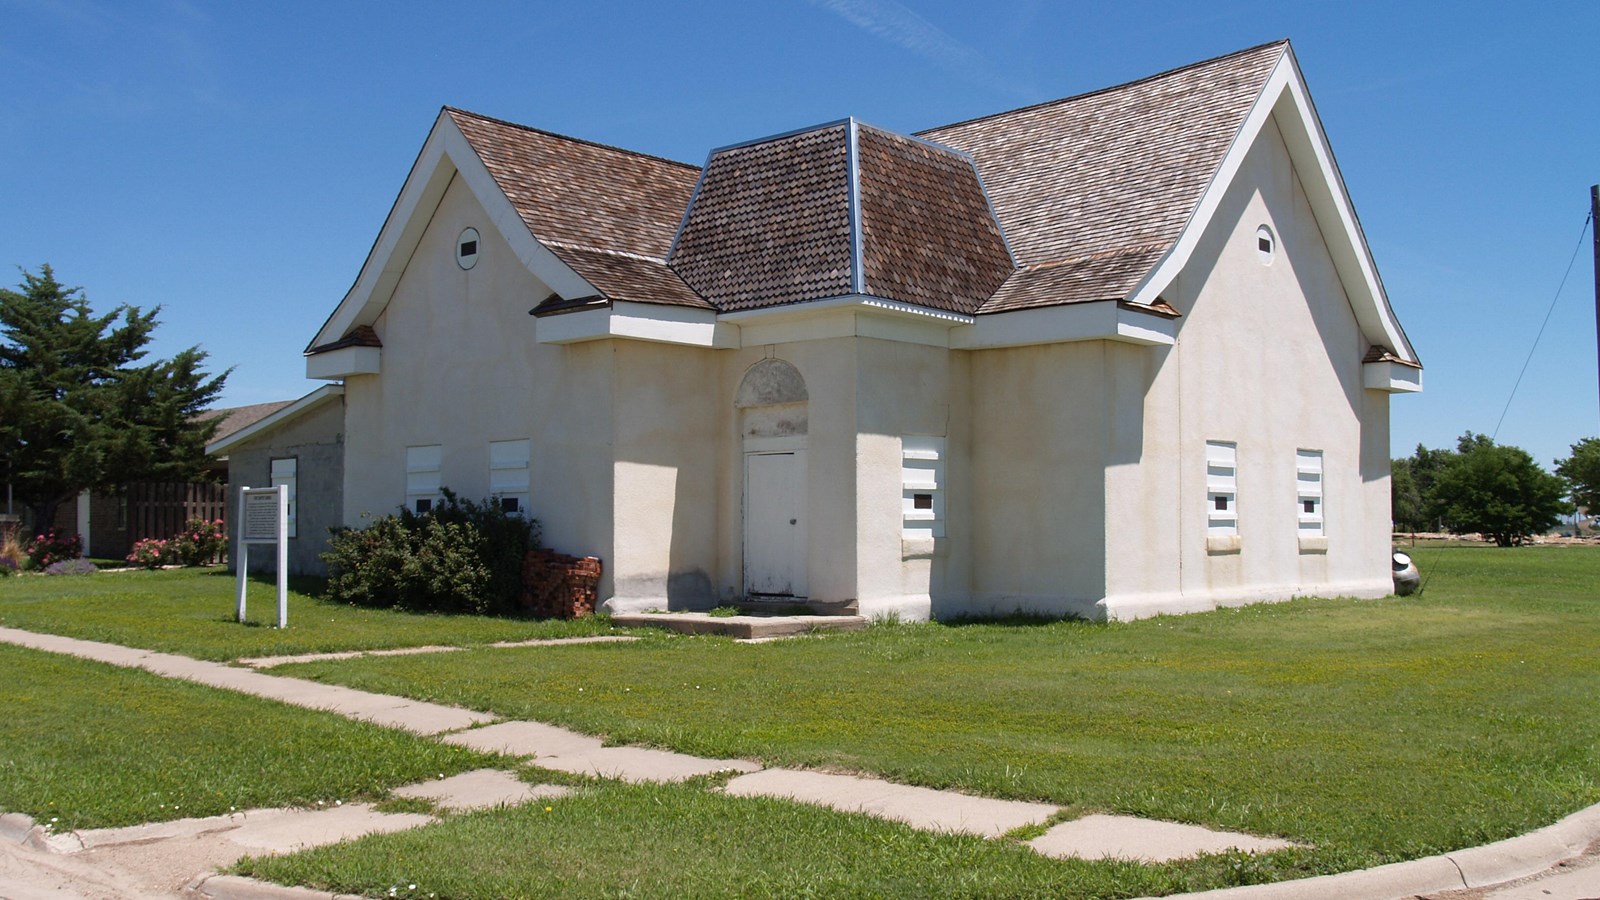 White stucco church with gray shingle roof on a grassy lawn on a street corner